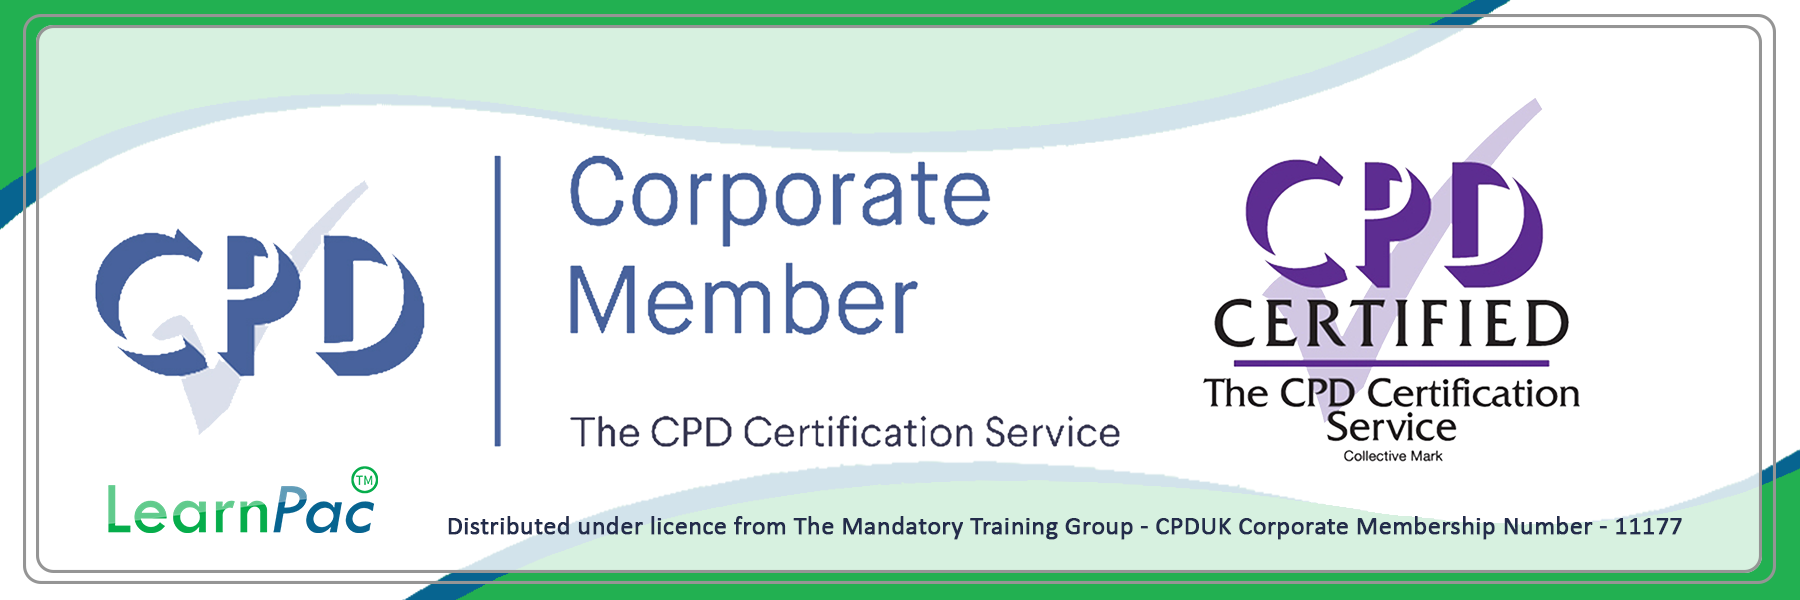 Mental Health Awareness - E-Learning Courses with Certificates - CPD Certified - LearnPac Systems UK -